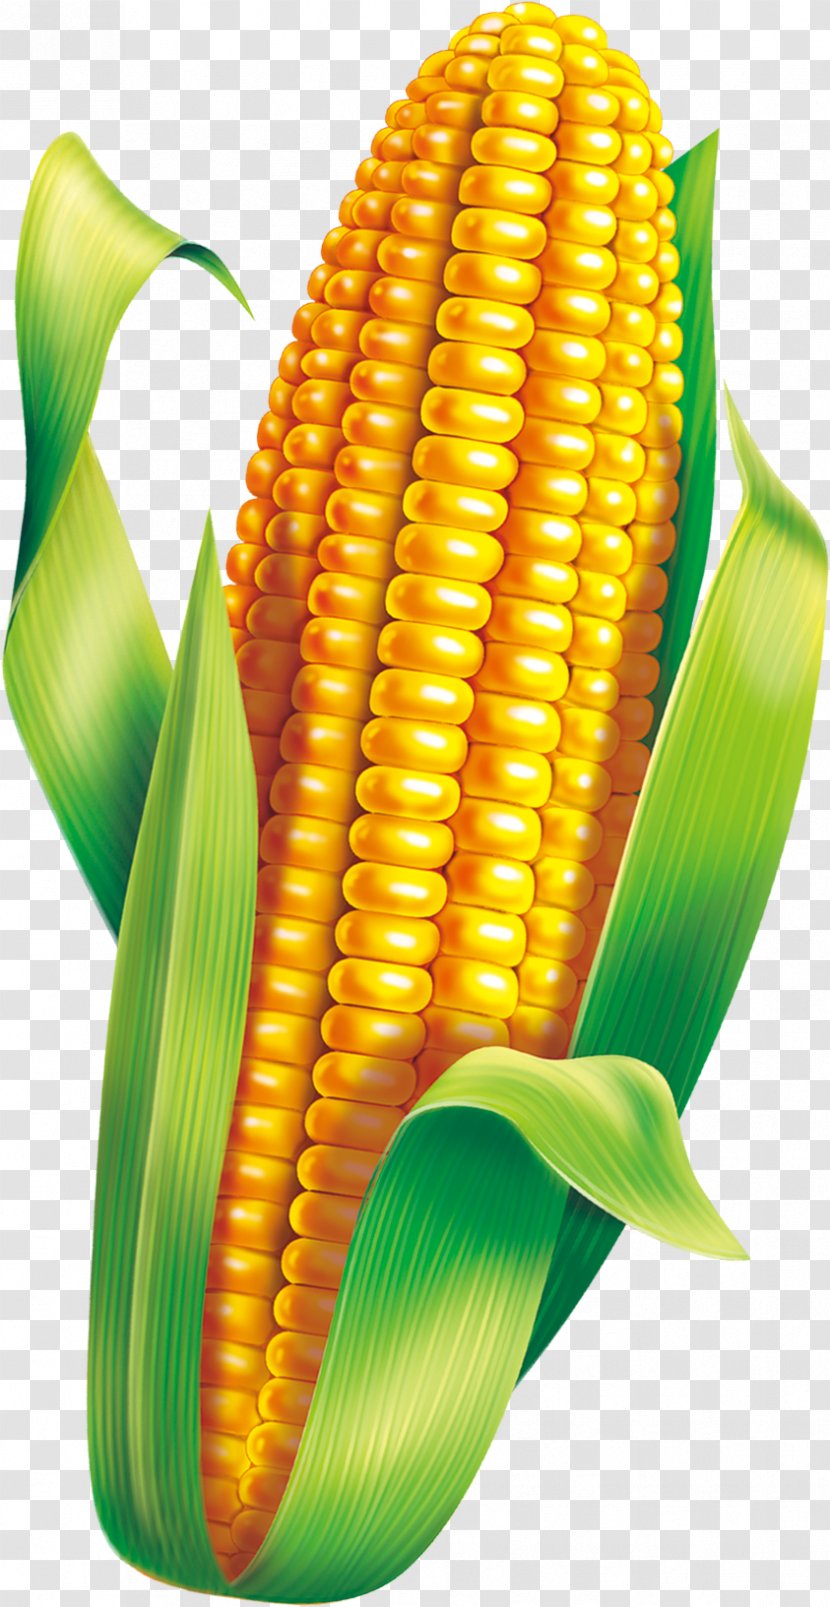 Corn On The Cob Maize Congee Breakfast - Material Transparent PNG